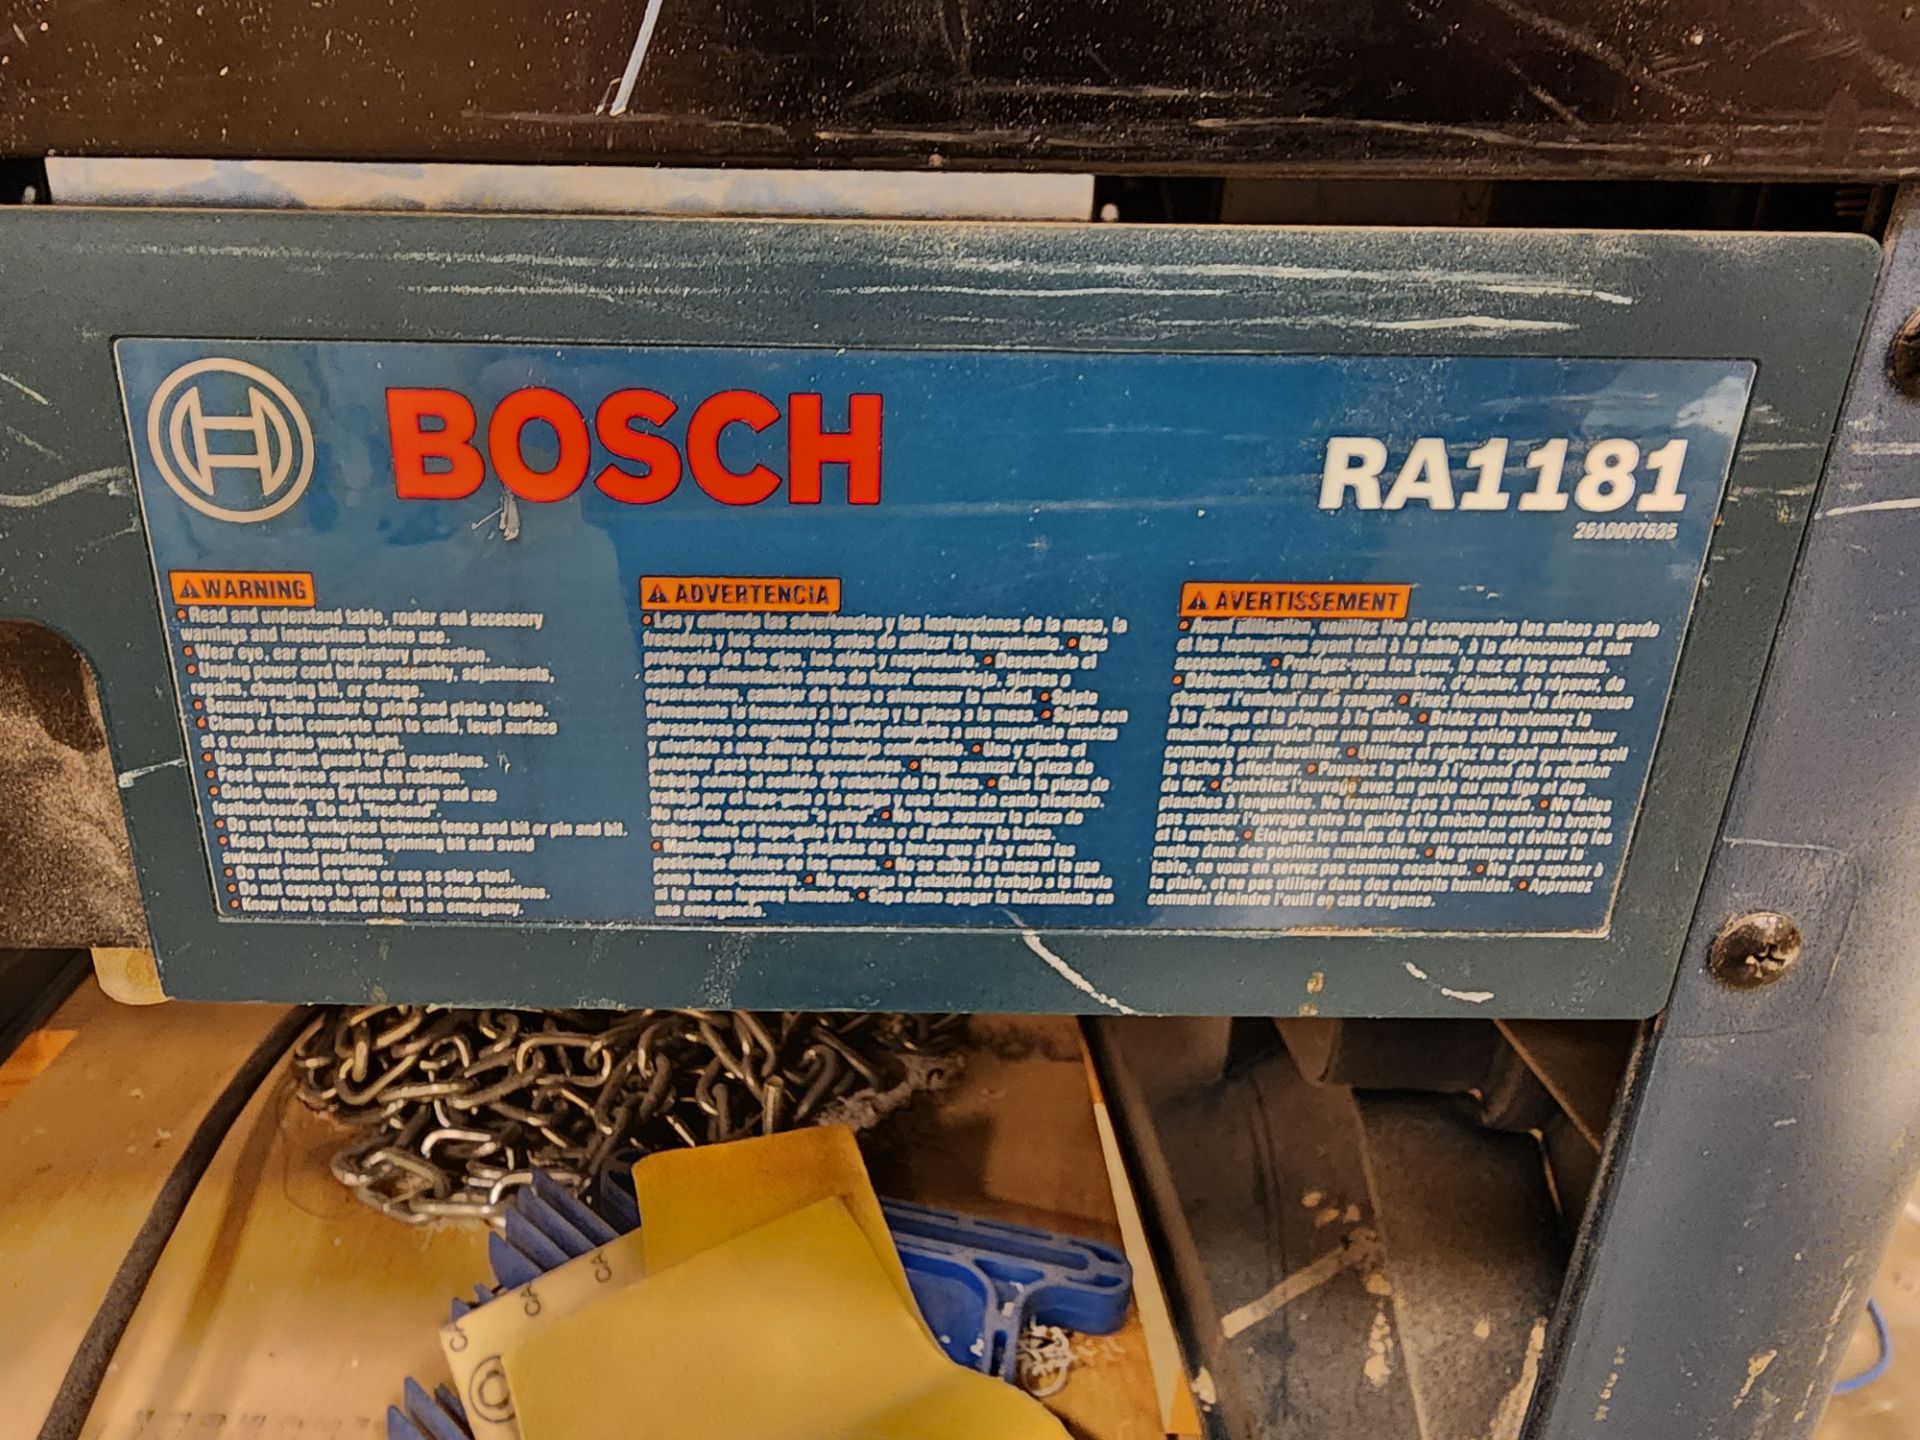 Bosch Model RA1181 Router Table (No Router) - Image 2 of 7